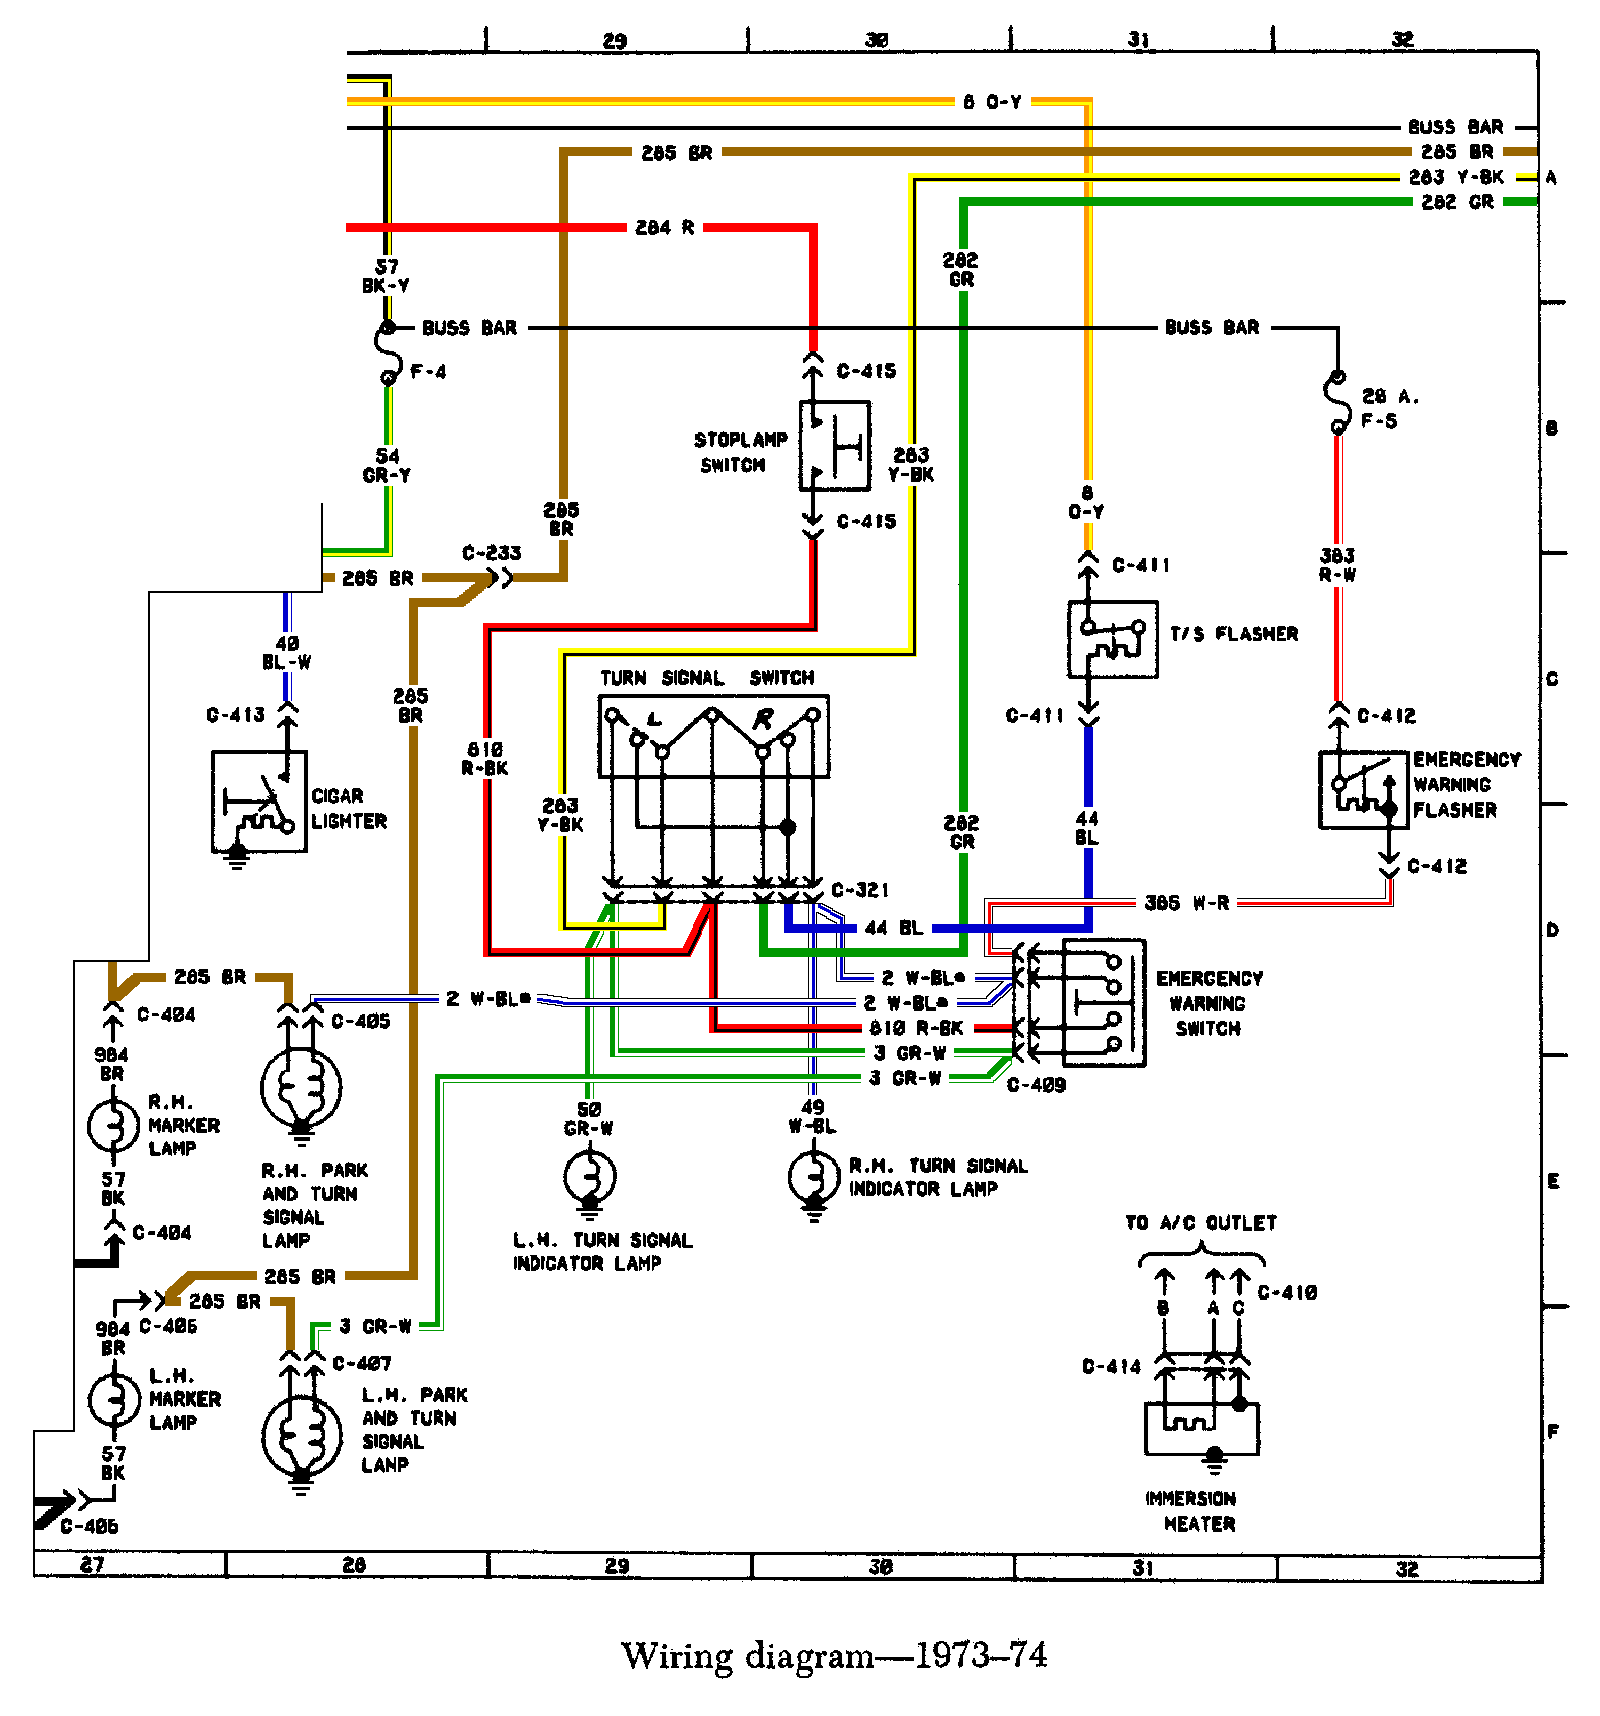 Ford Turn Signal Wiring Diagram from seabiscuit68.tripod.com